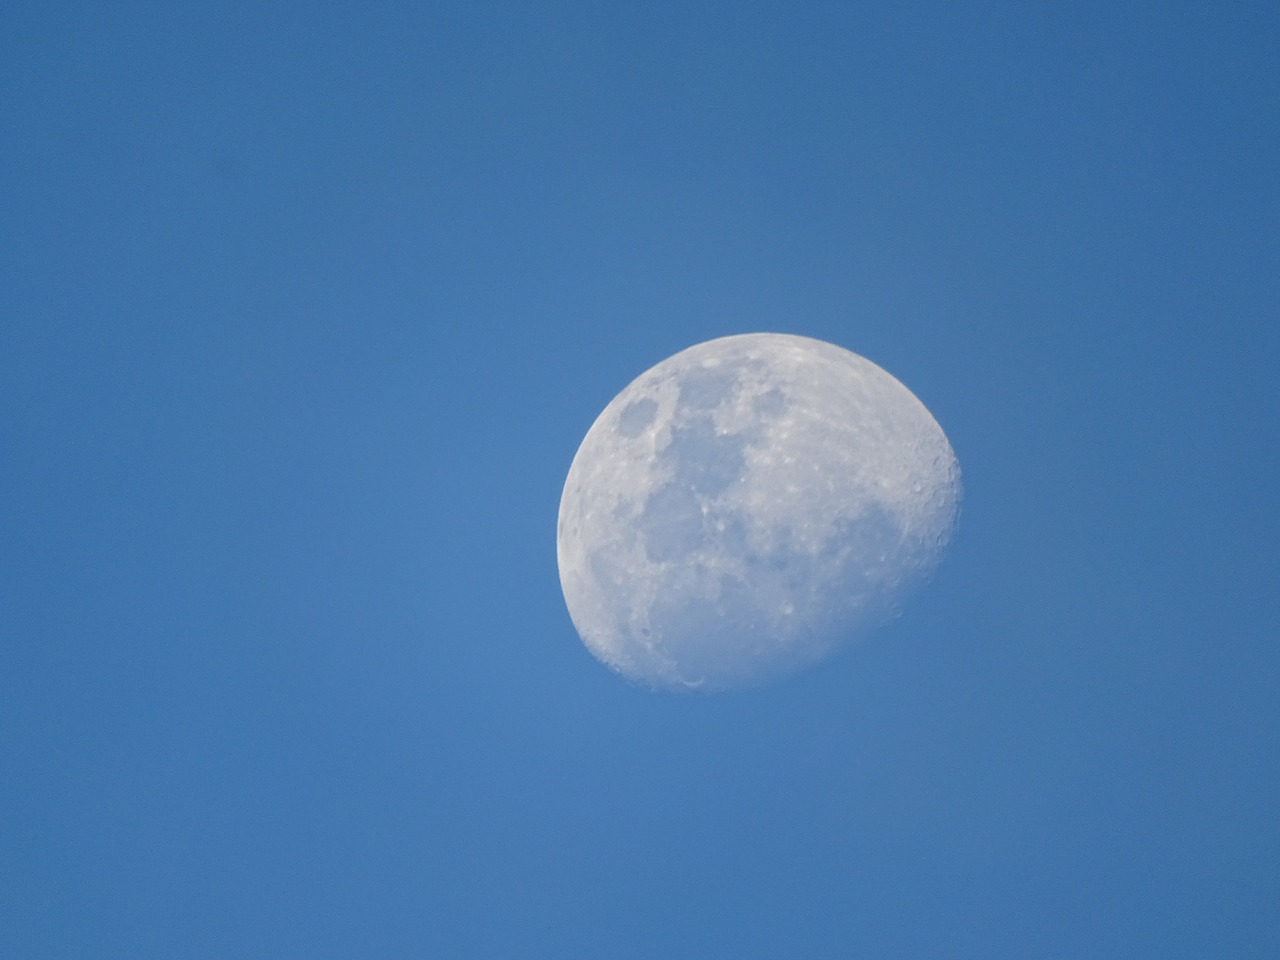 Download Free Photo Of Moonblue Skynatureclear Skycrescent Moon